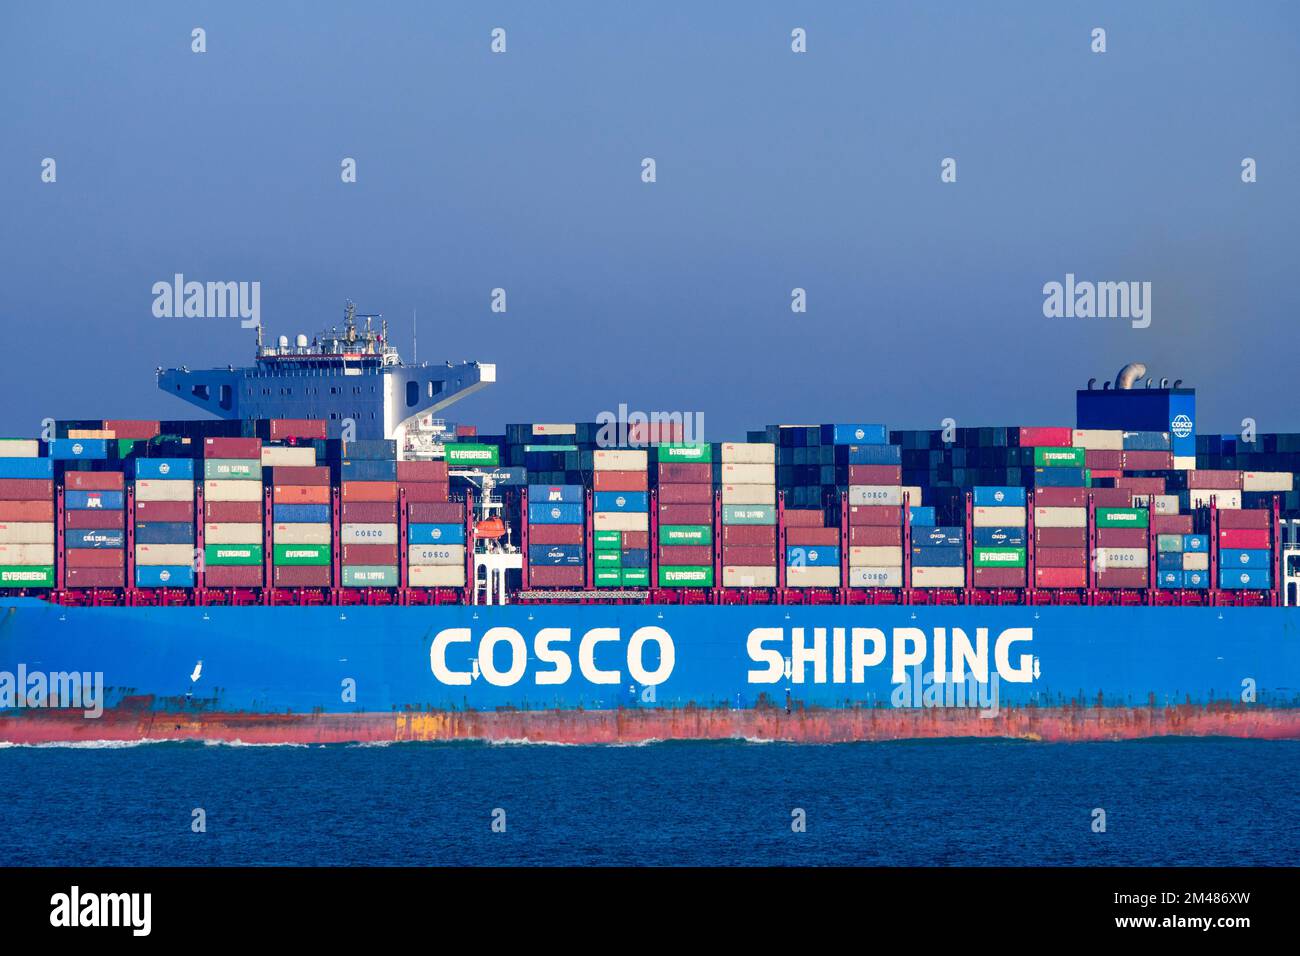 Chinese container ship / containership COSCO Shipping Sagittarius loaded with containers on the North Sea, sailing under flag of Hong Kong, China Stock Photo